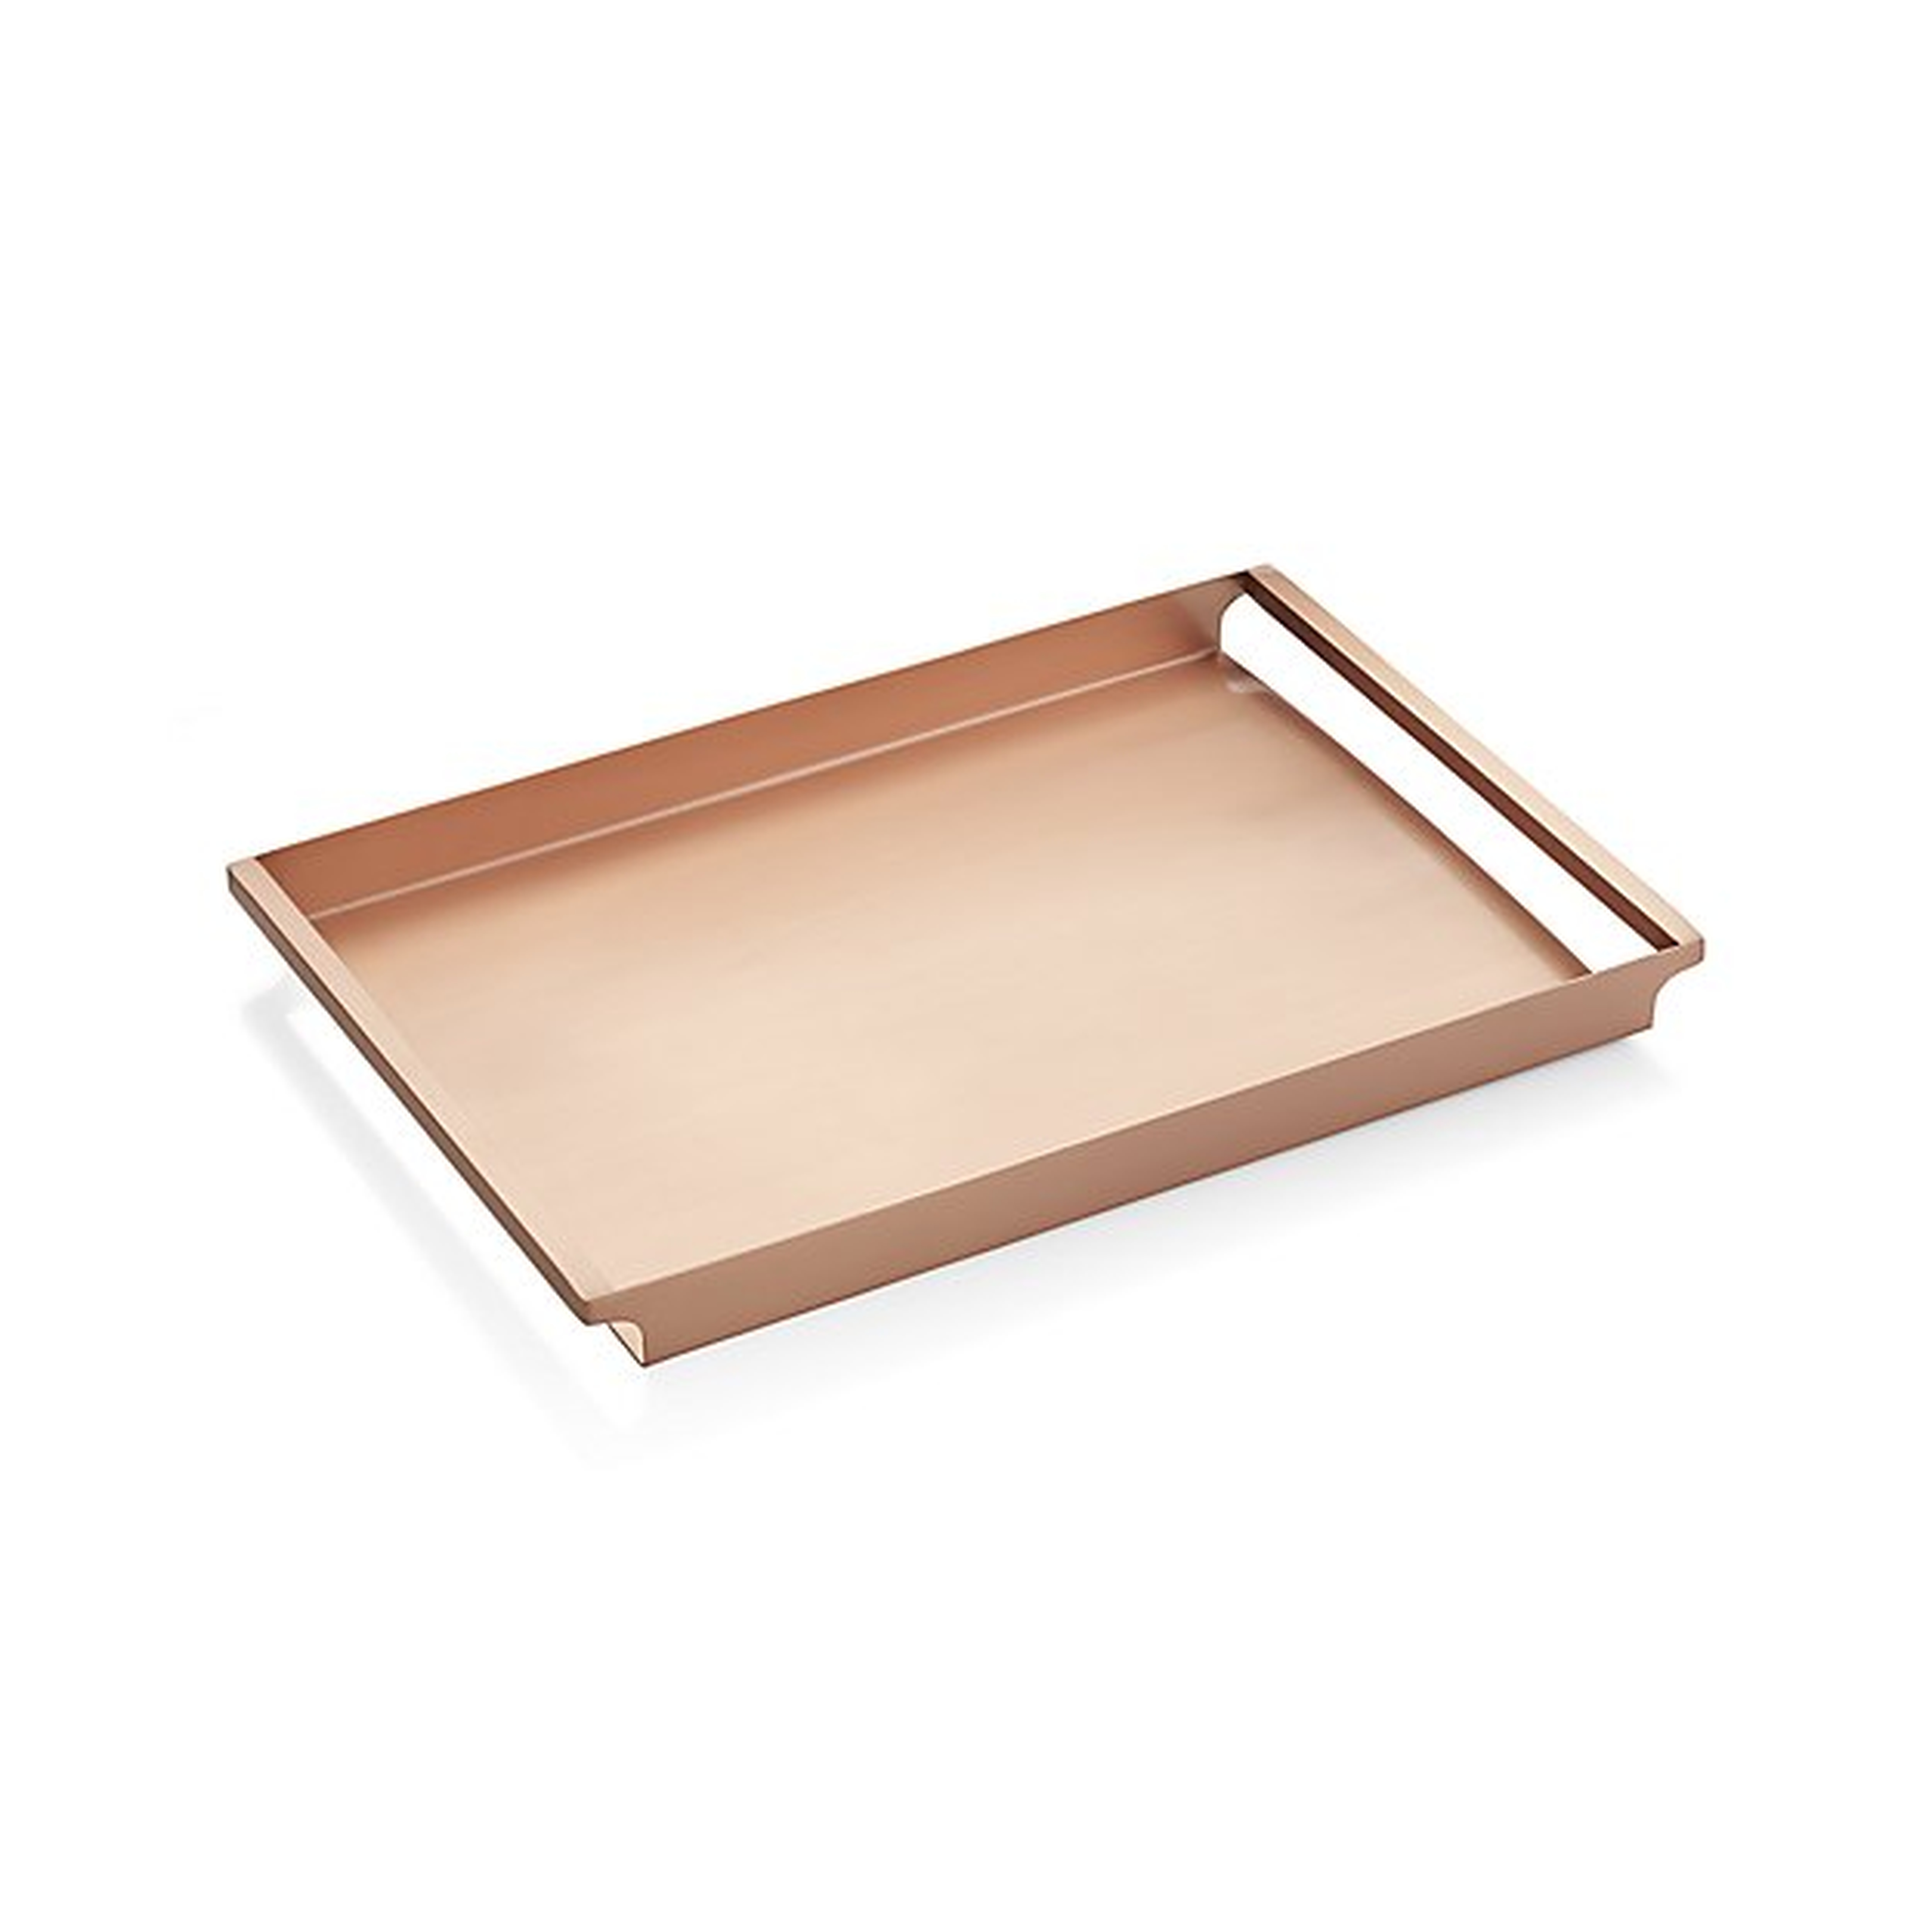 Orb Copper Tray - Crate and Barrel